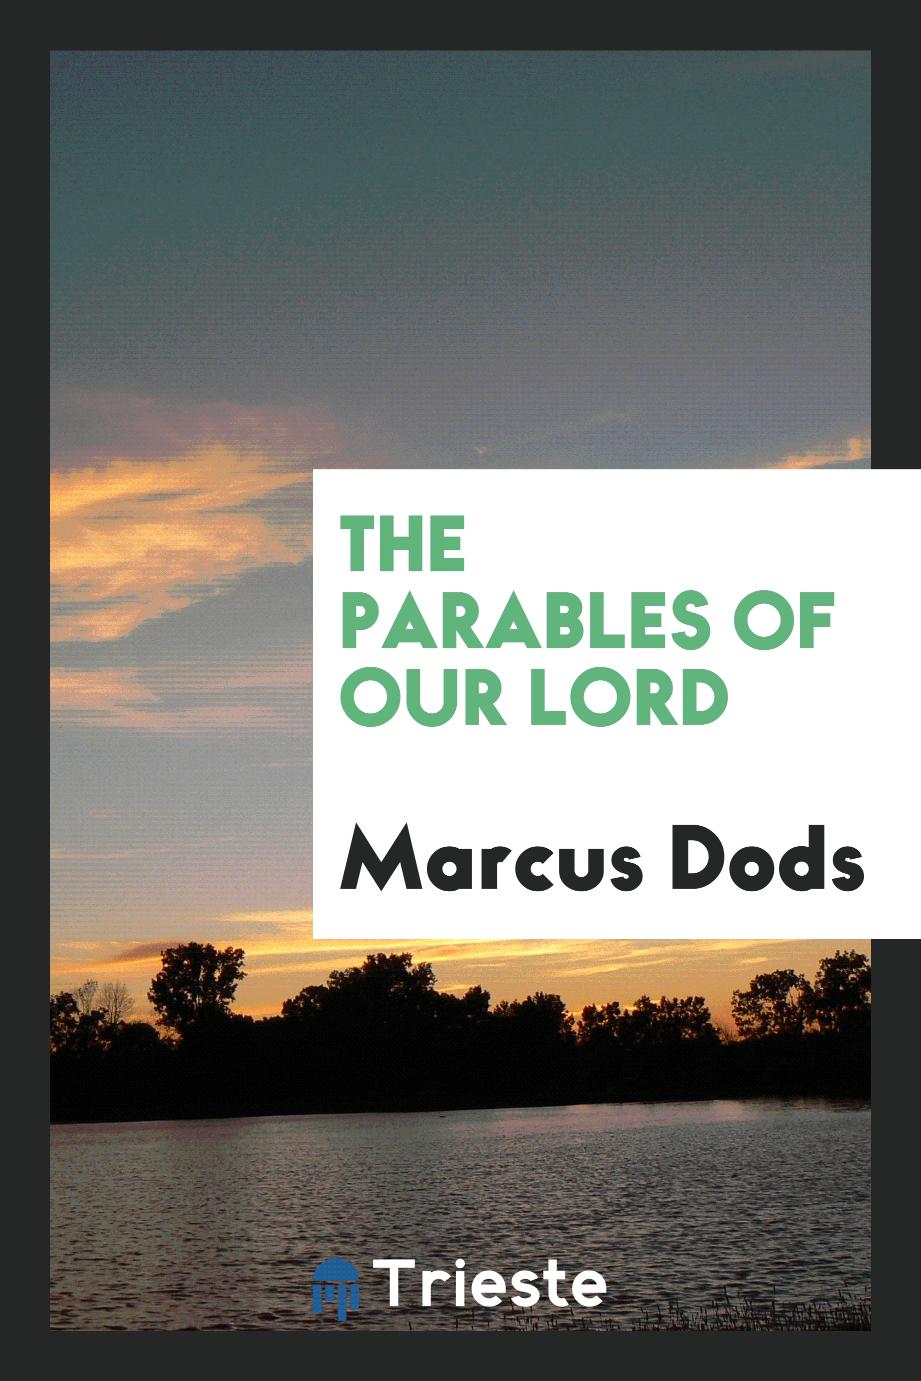 The parables of our Lord